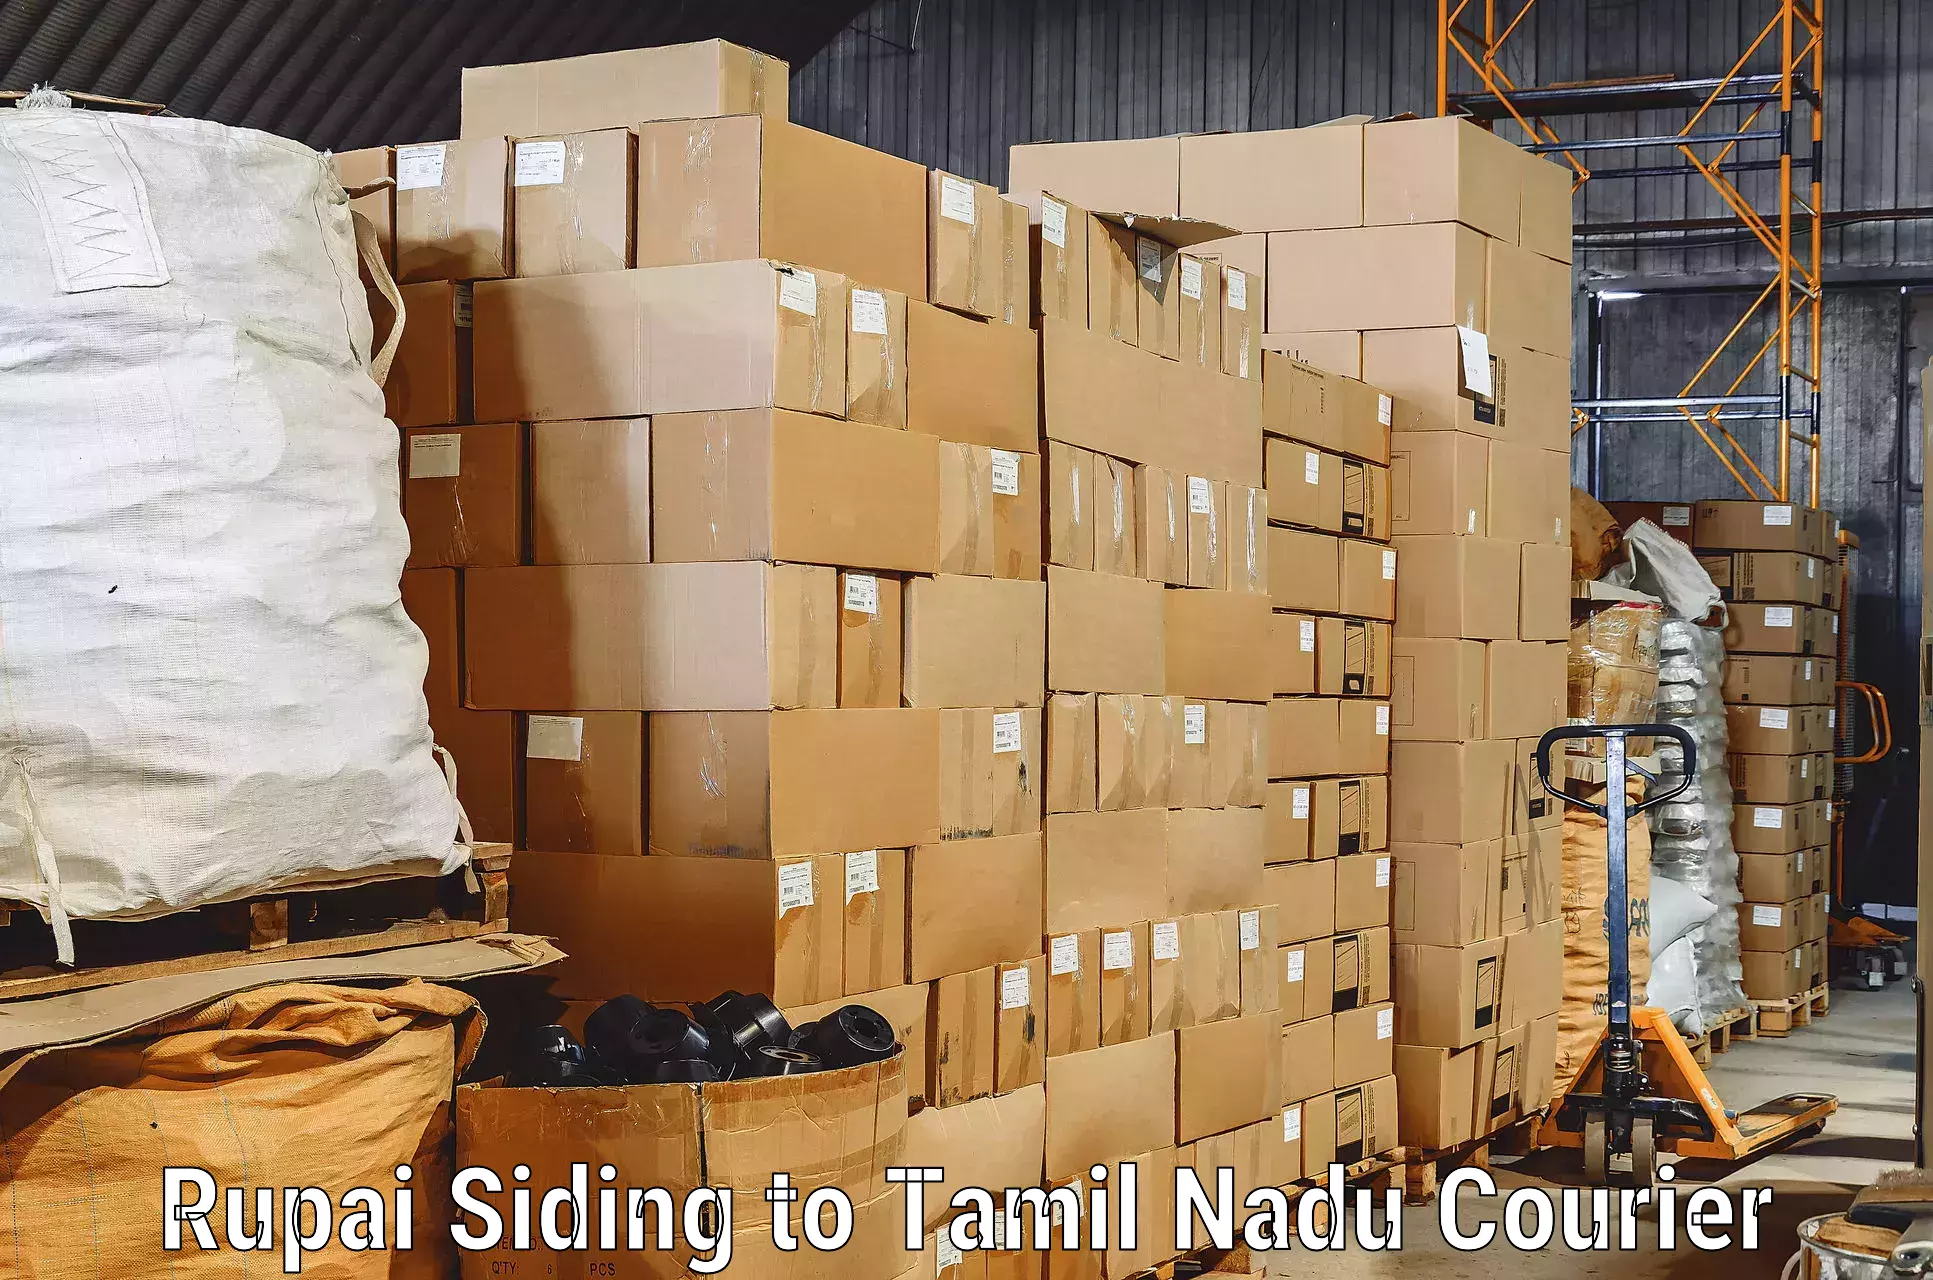 Dependable moving services Rupai Siding to Shanmugha Arts Science Technology and Research Academy Thanjavur